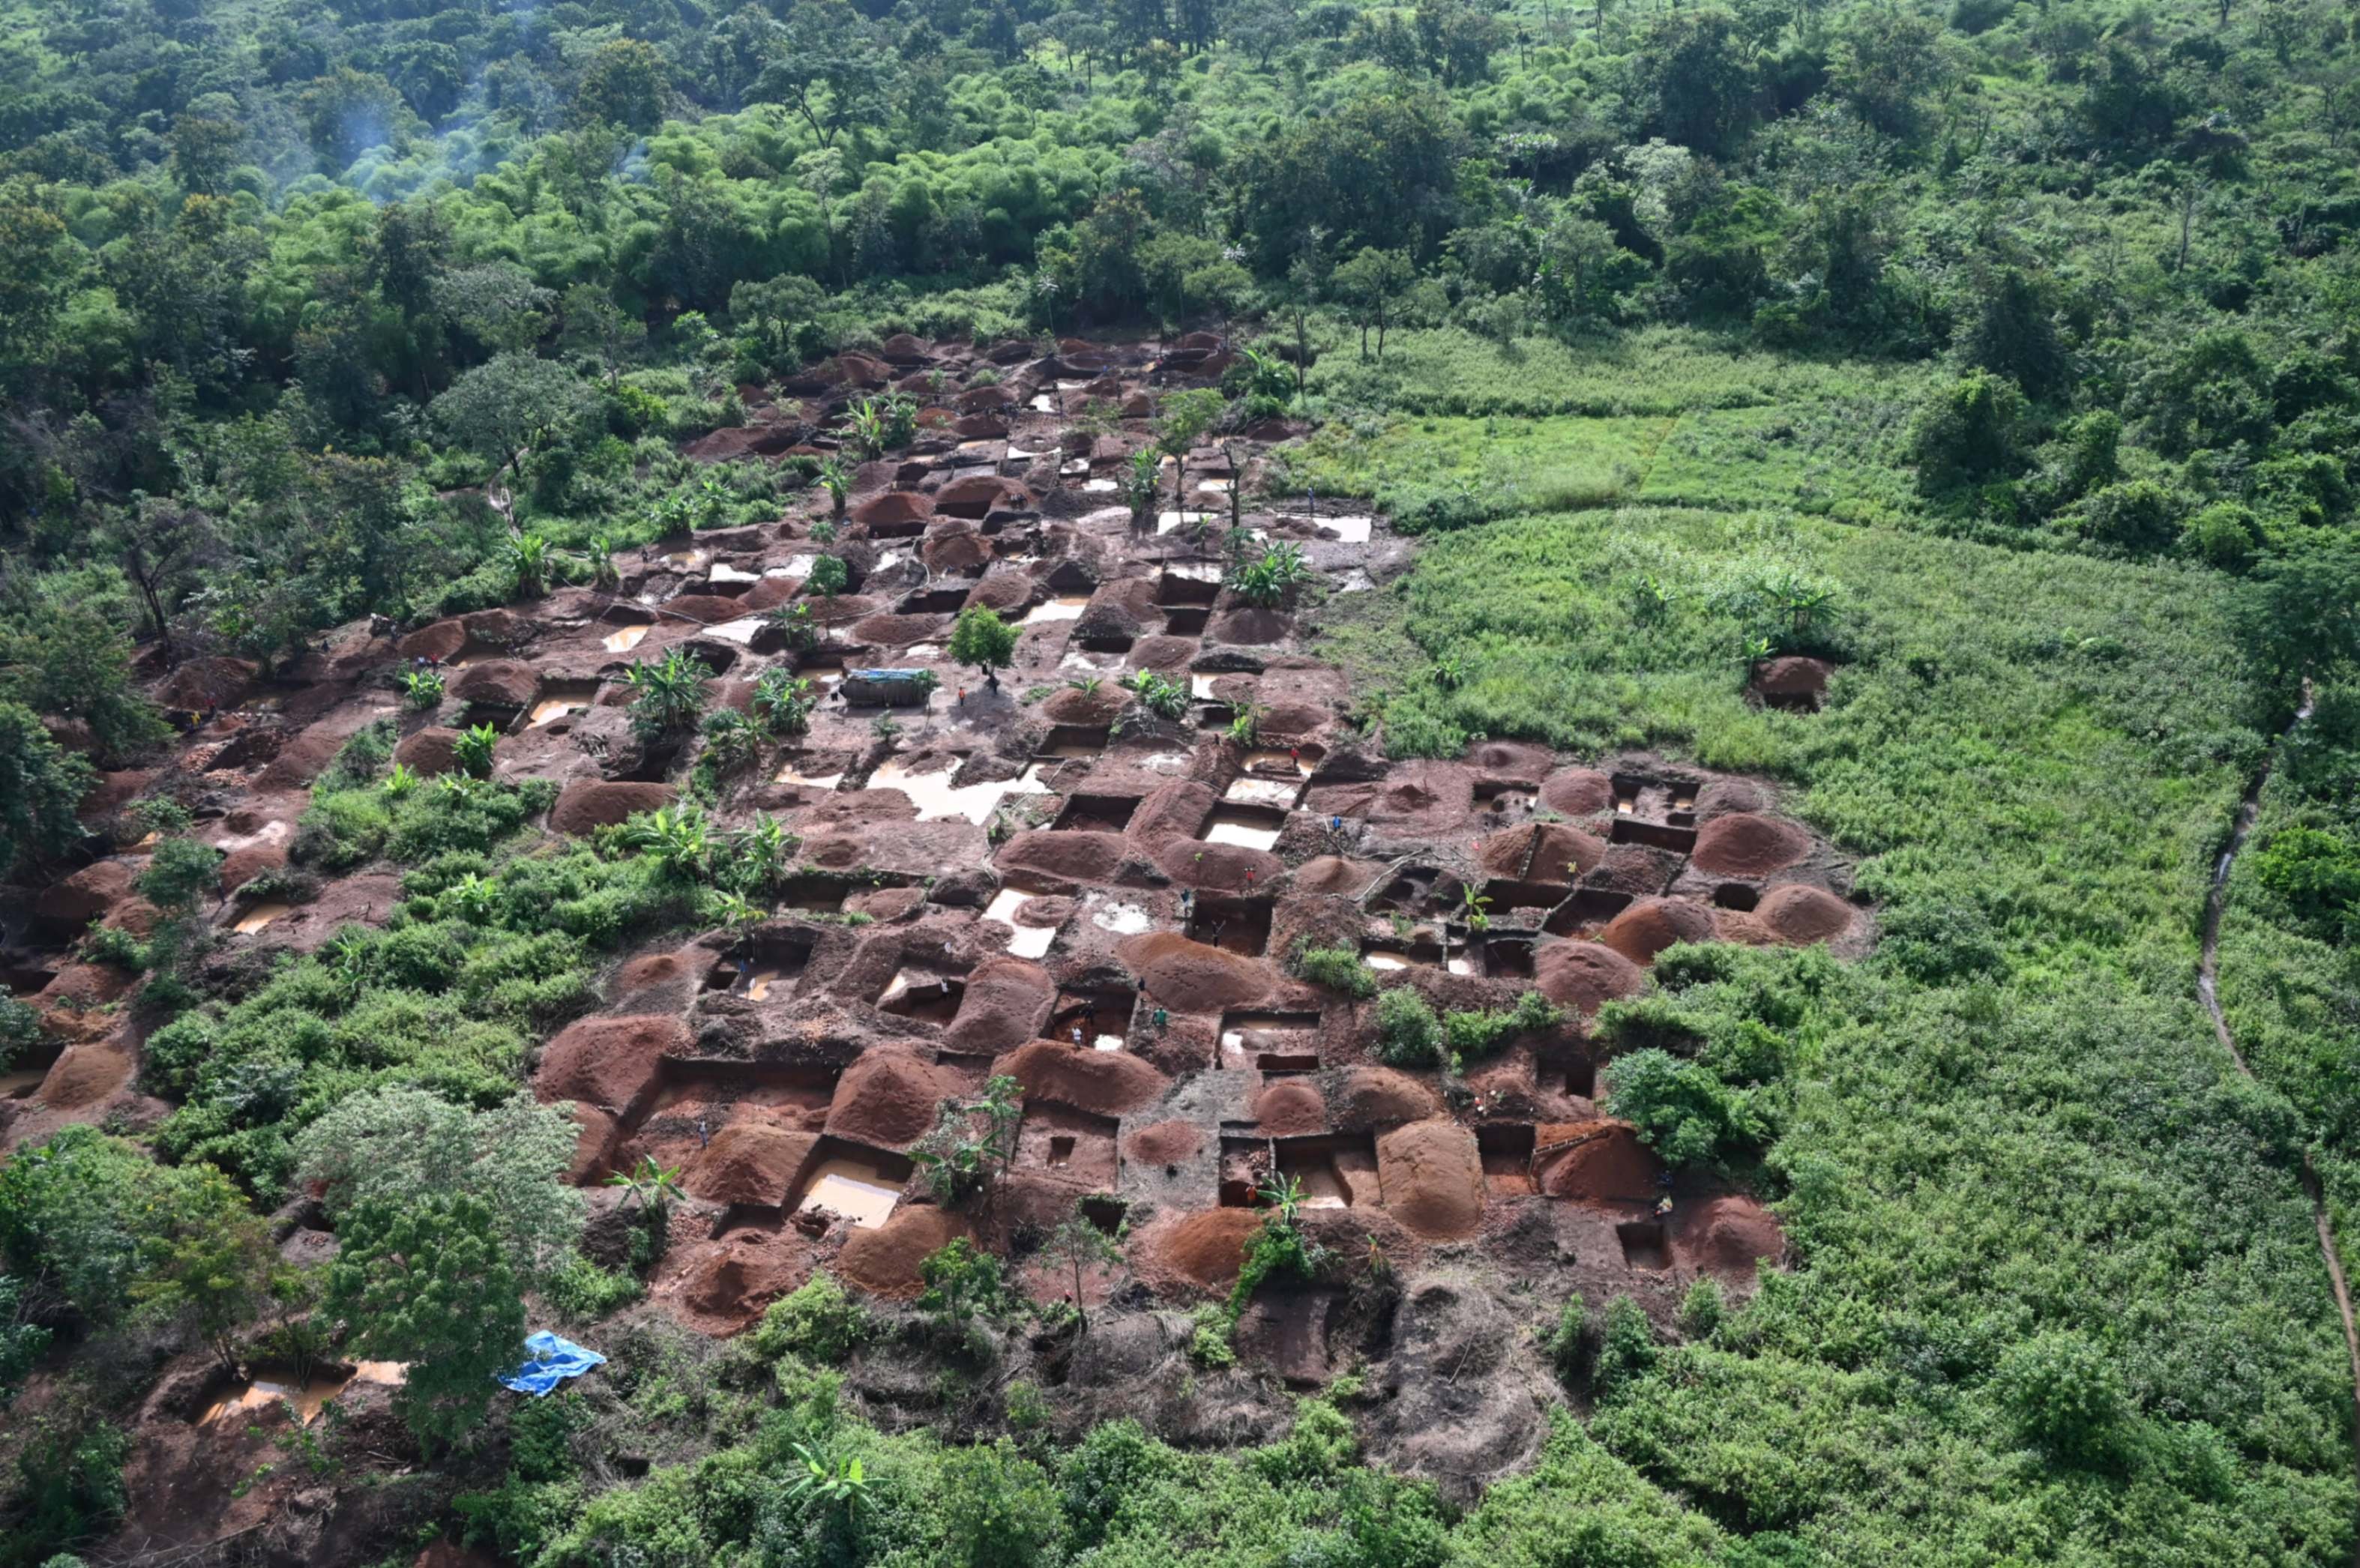 Aerial view of excavations in a clearing in a forest.